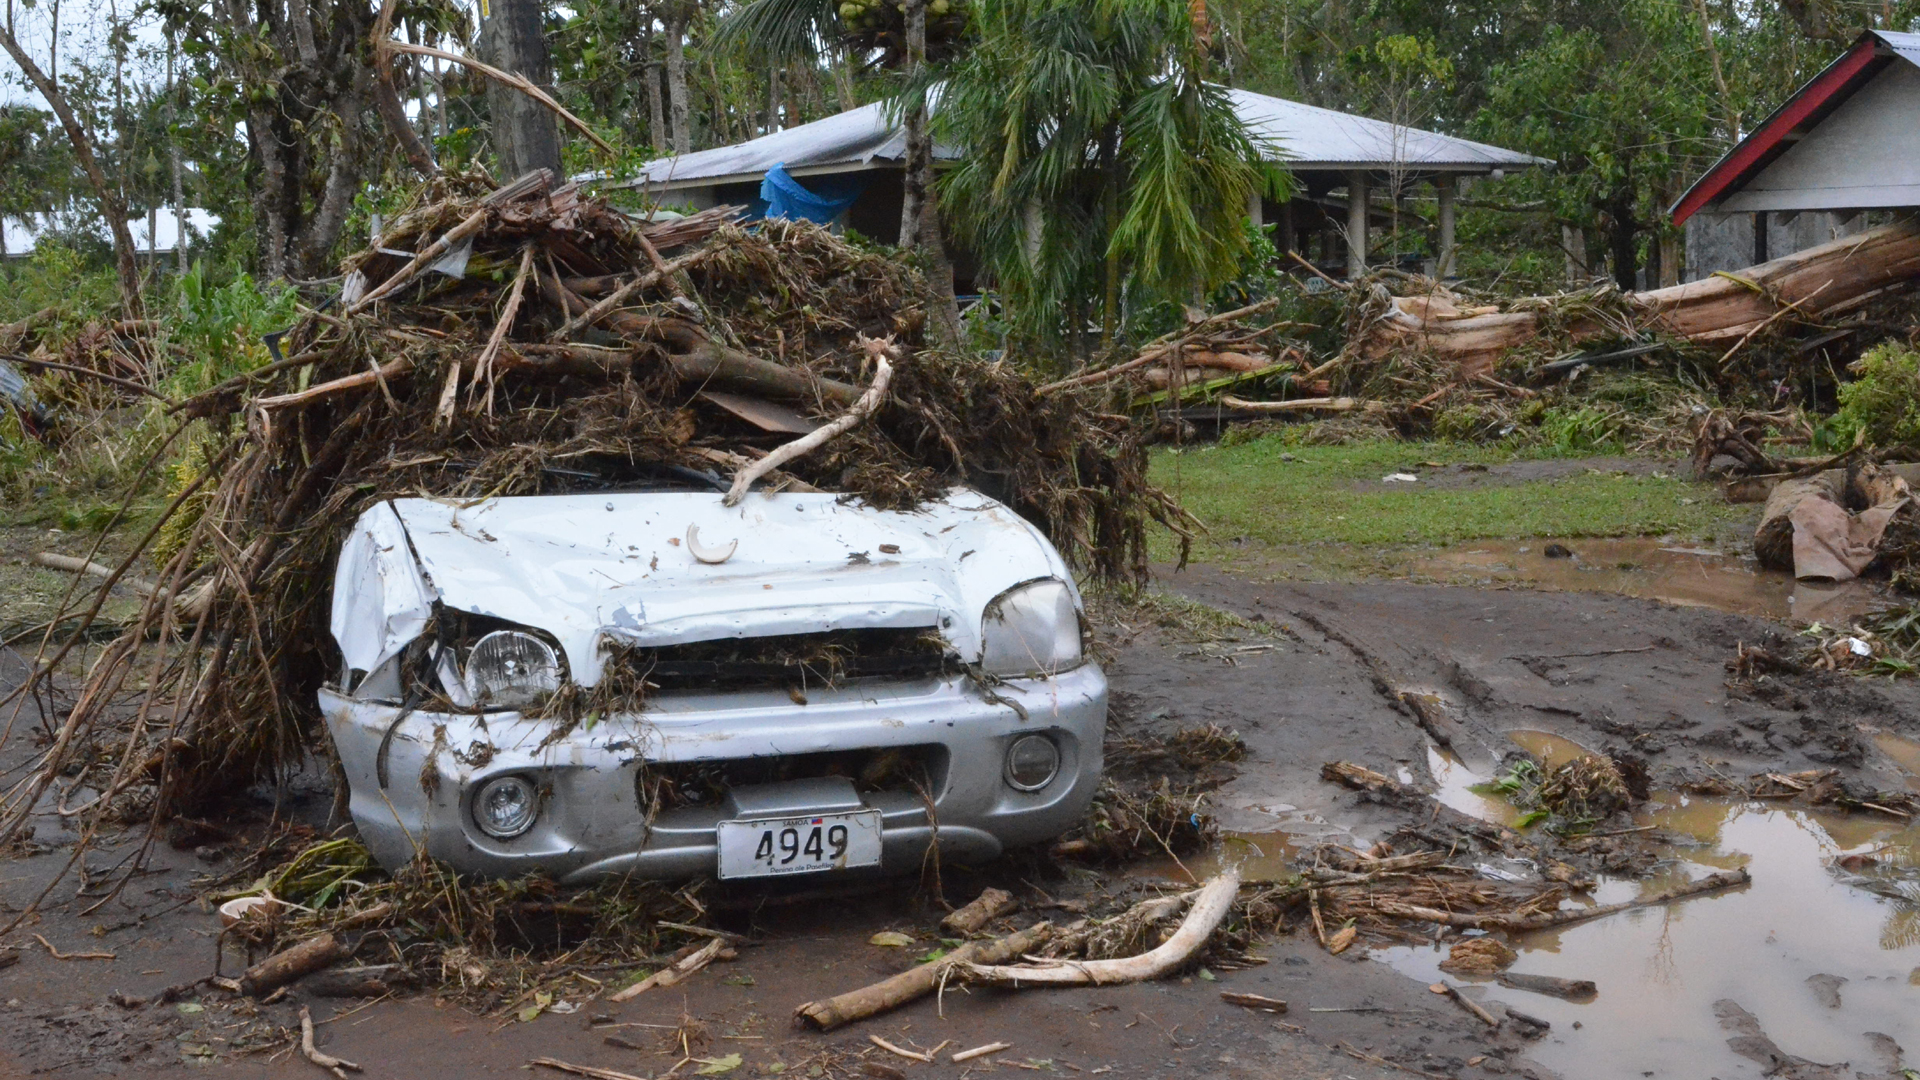 Damage caused by Cyclone Evan 2012 in Samoa